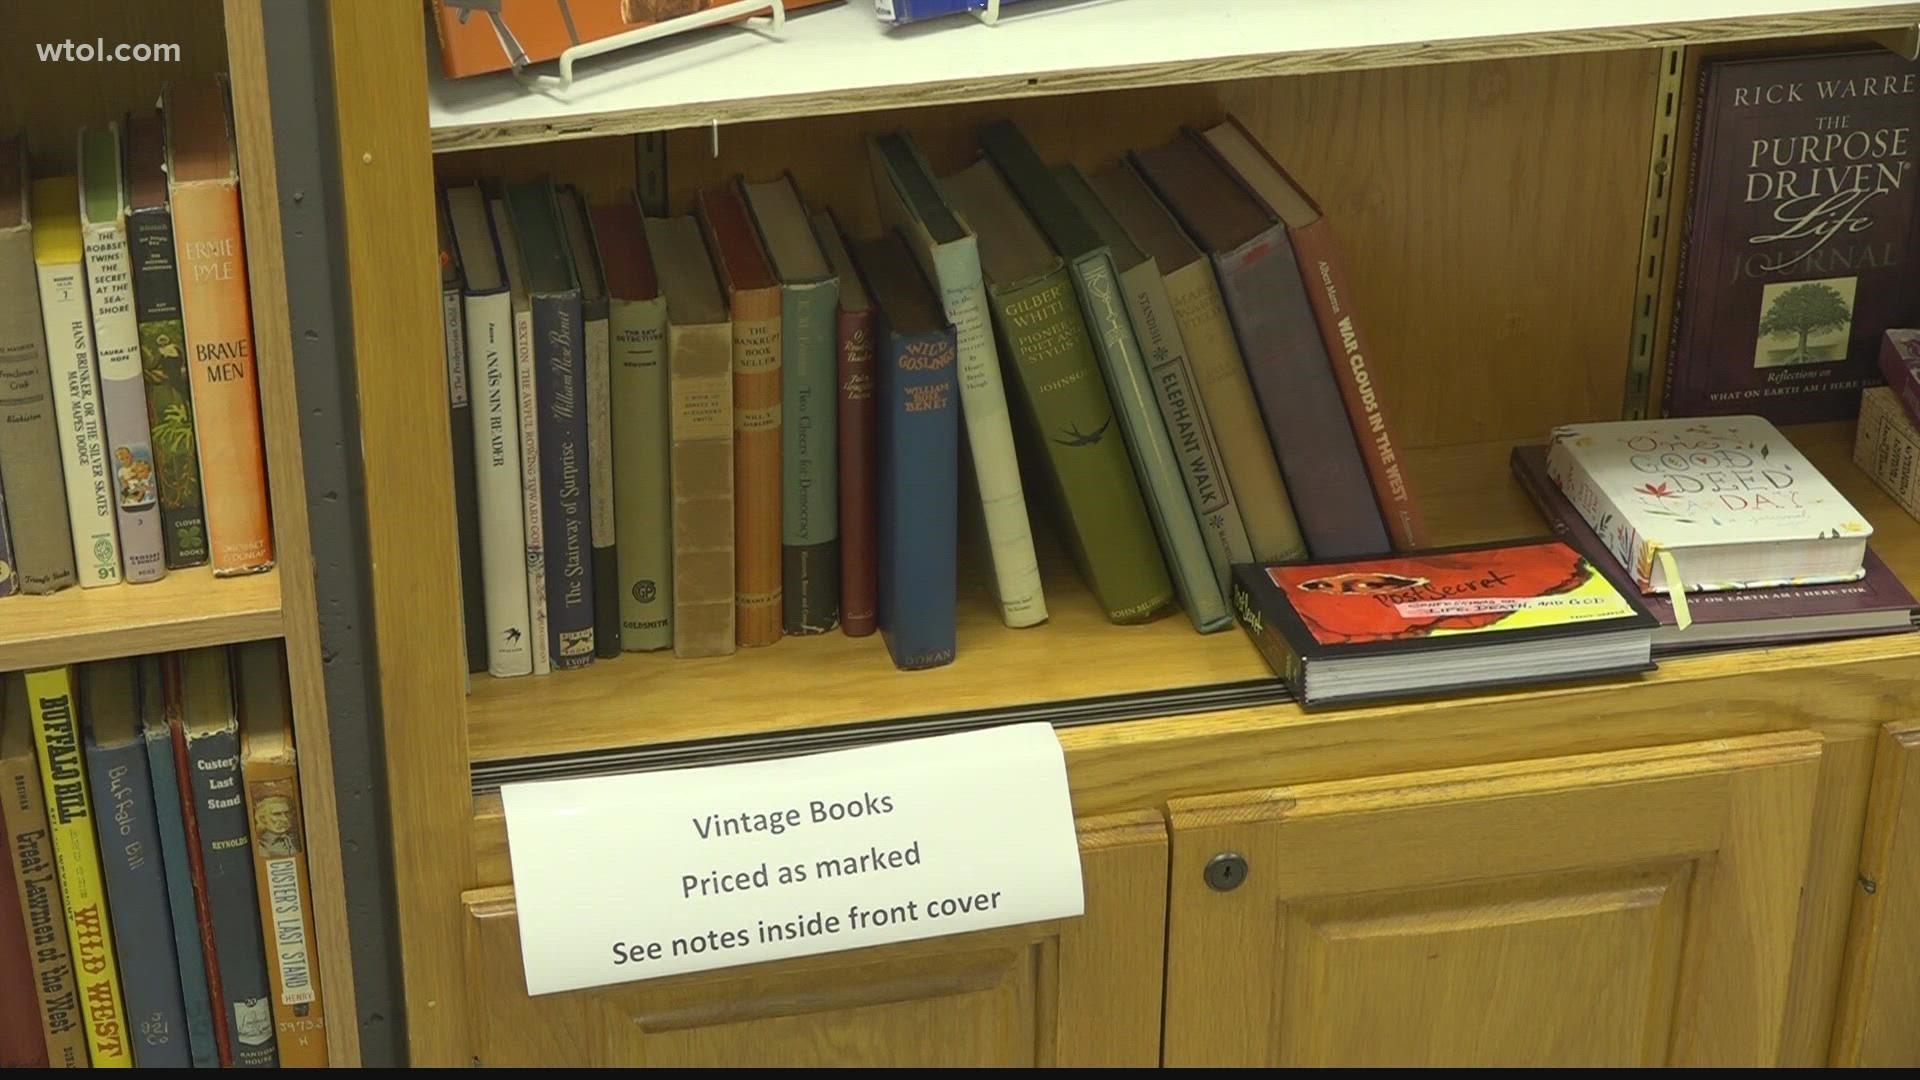 The Book Cellar received a donation of vintage books and is selling 250 titles this week.